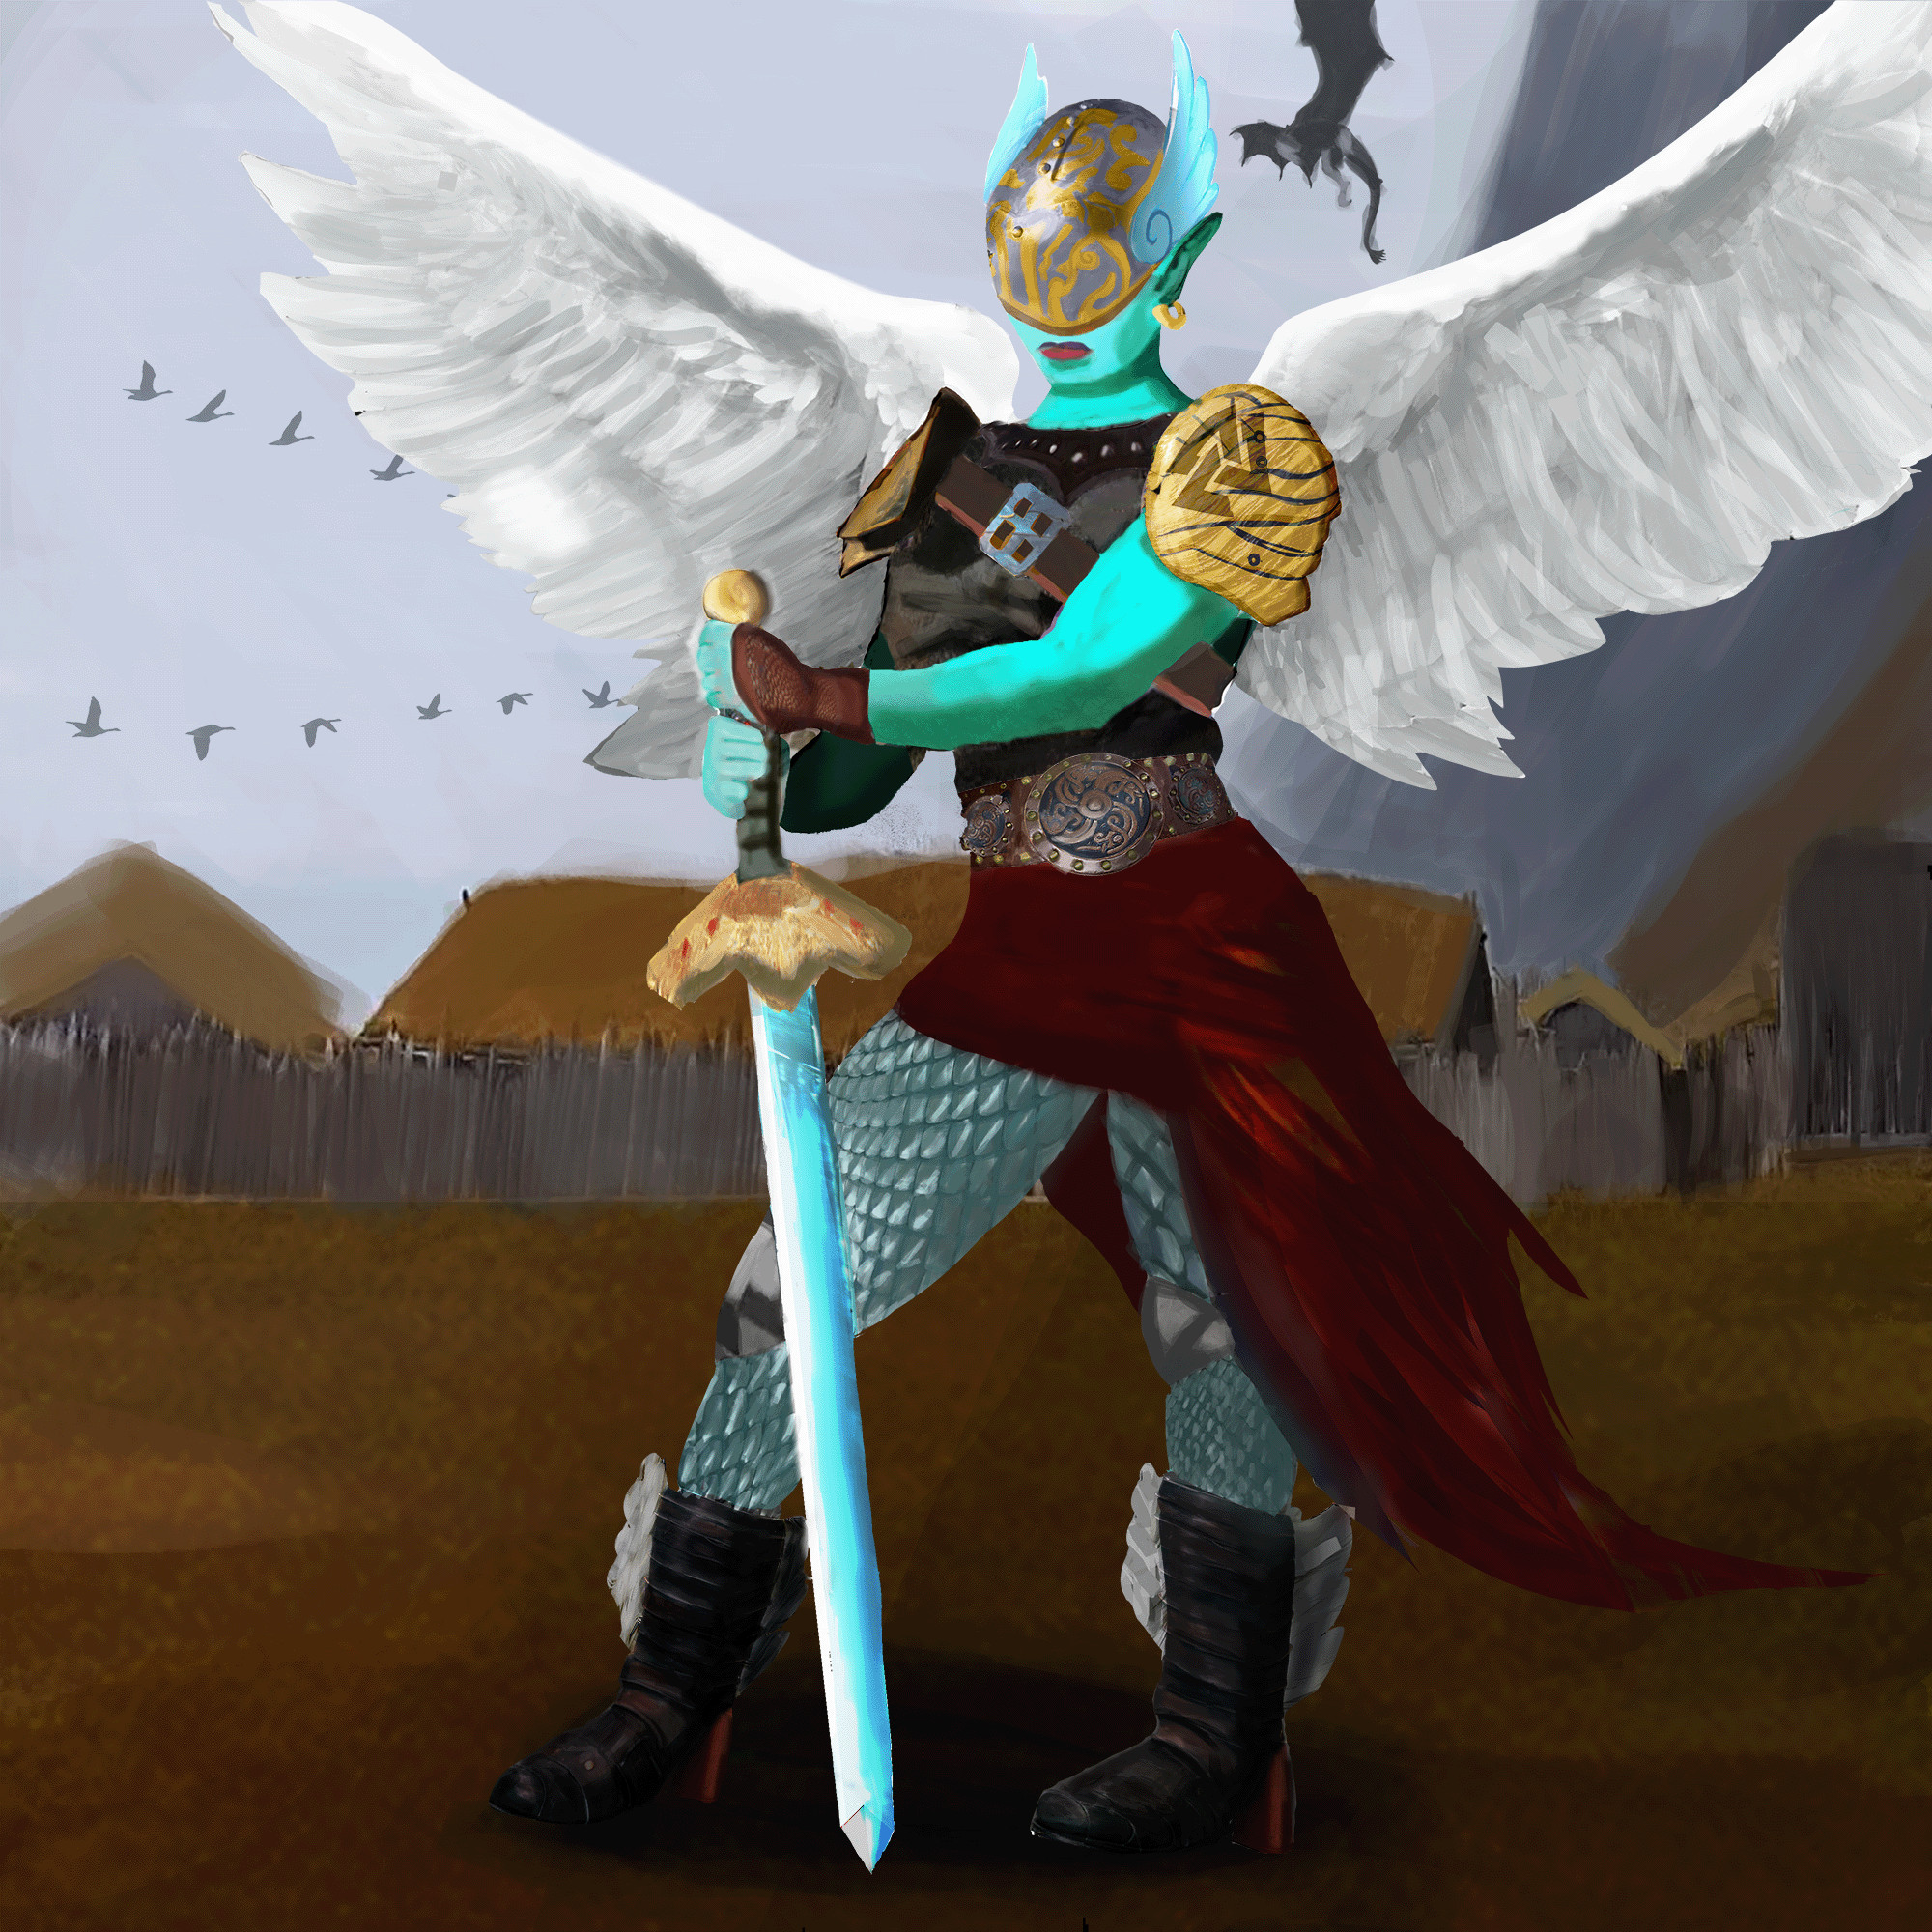 Valkyrie with sword near an viking village made in photoshop